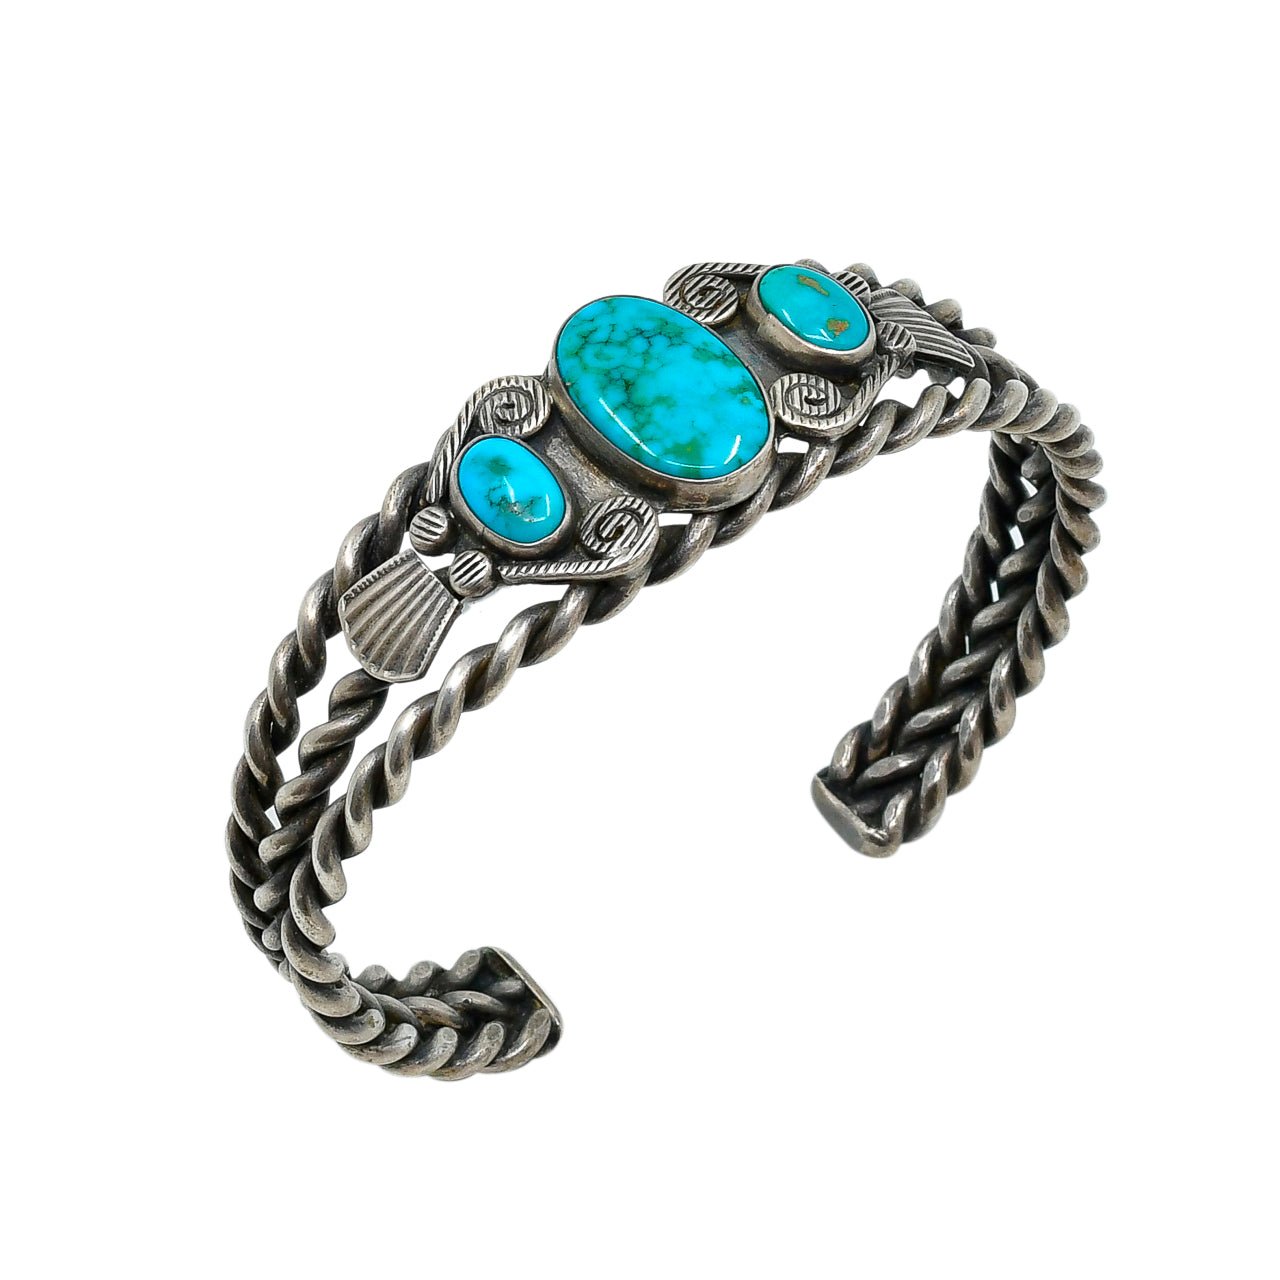 Vintage Navajo Silver Twisted Wire Bracelet With Natural Turquoise - Turquoise & Tufa